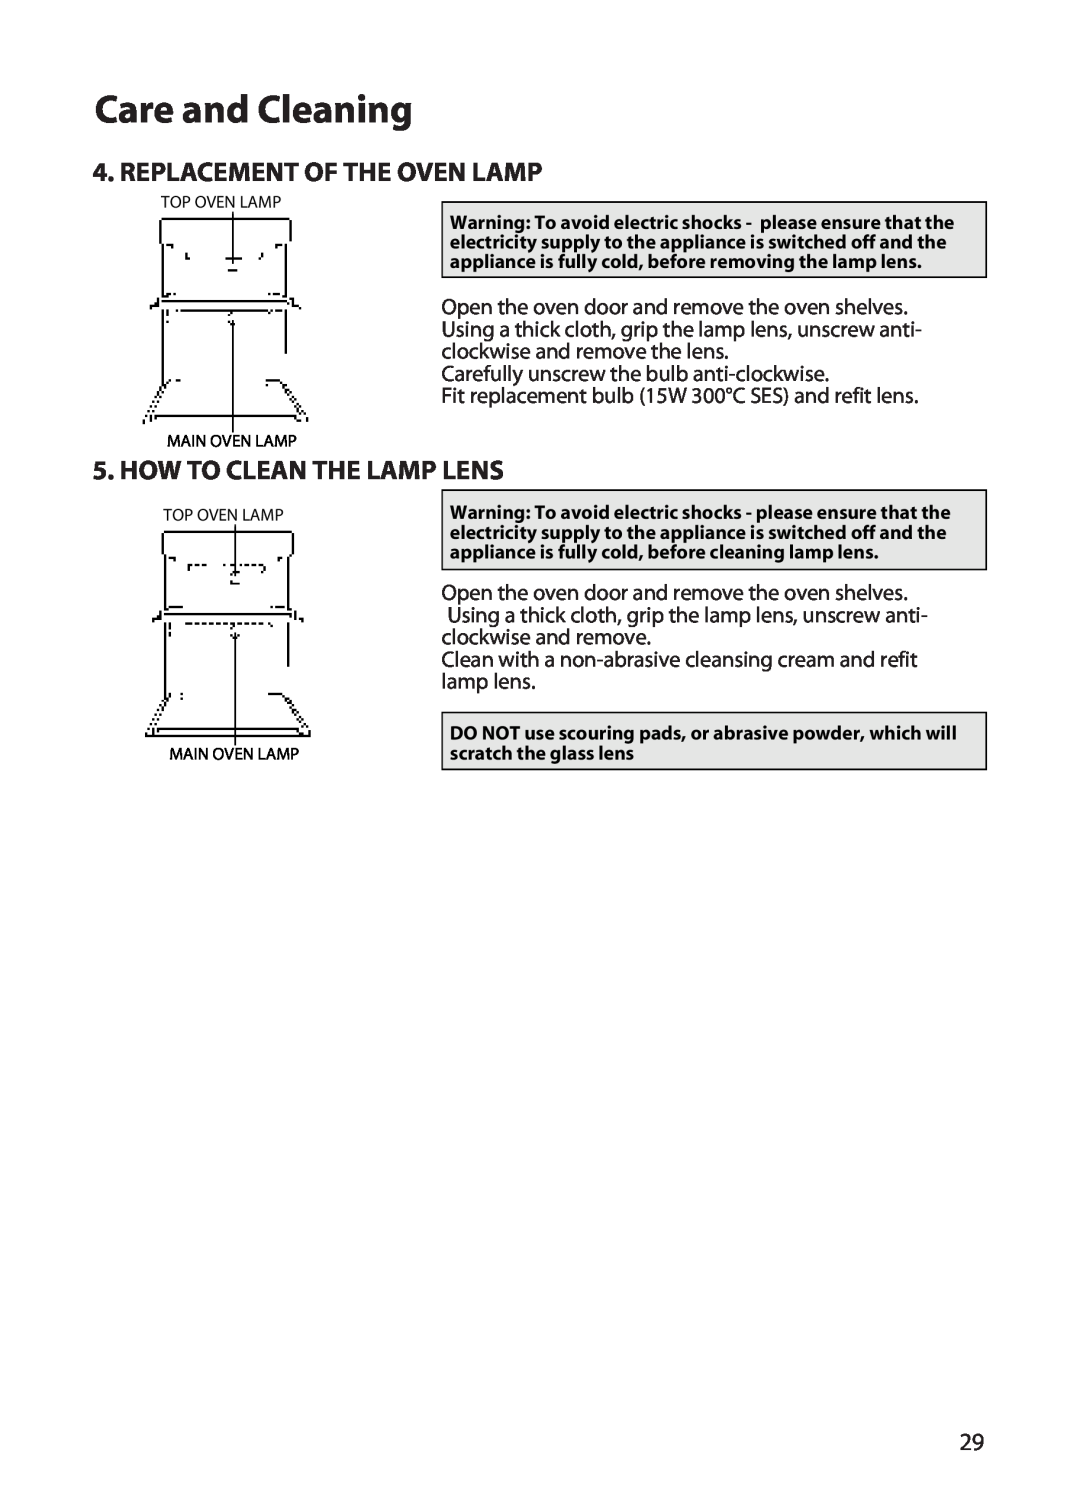 Hotpoint UD47, UT47 manual Replacement Of The Oven Lamp, How To Clean The Lamp Lens, Care and Cleaning 